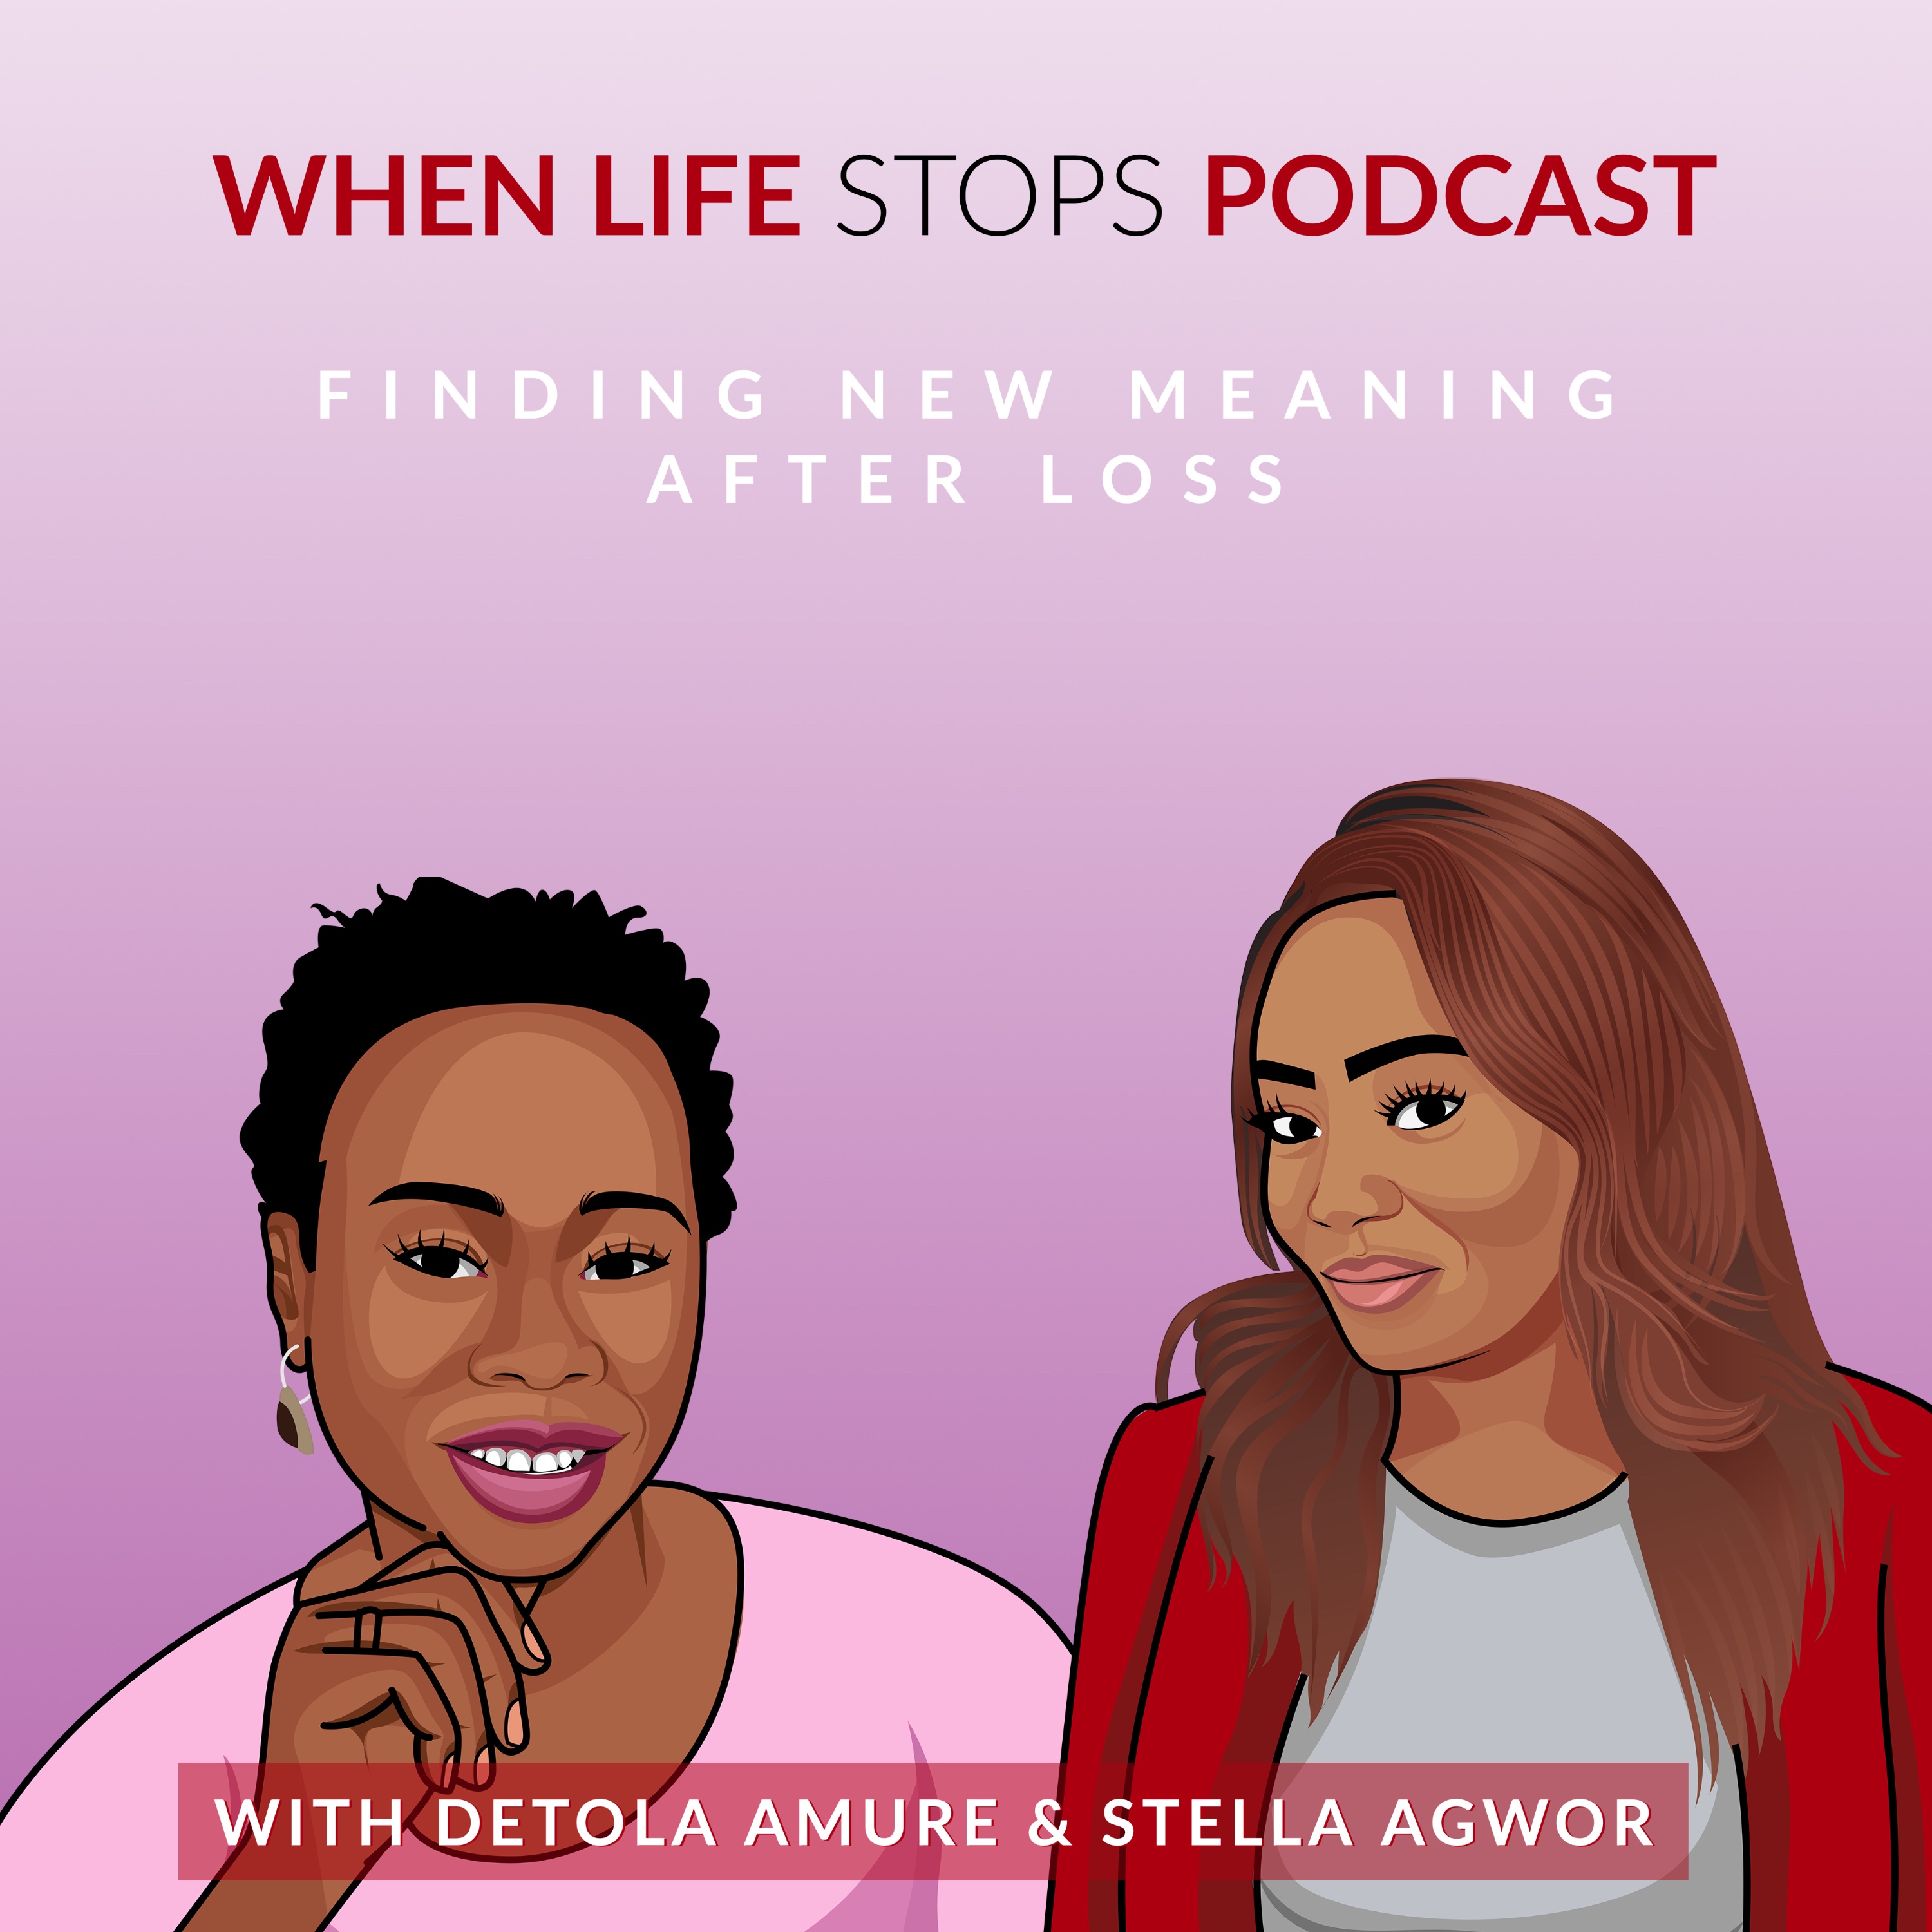 When Life Stops Podcast